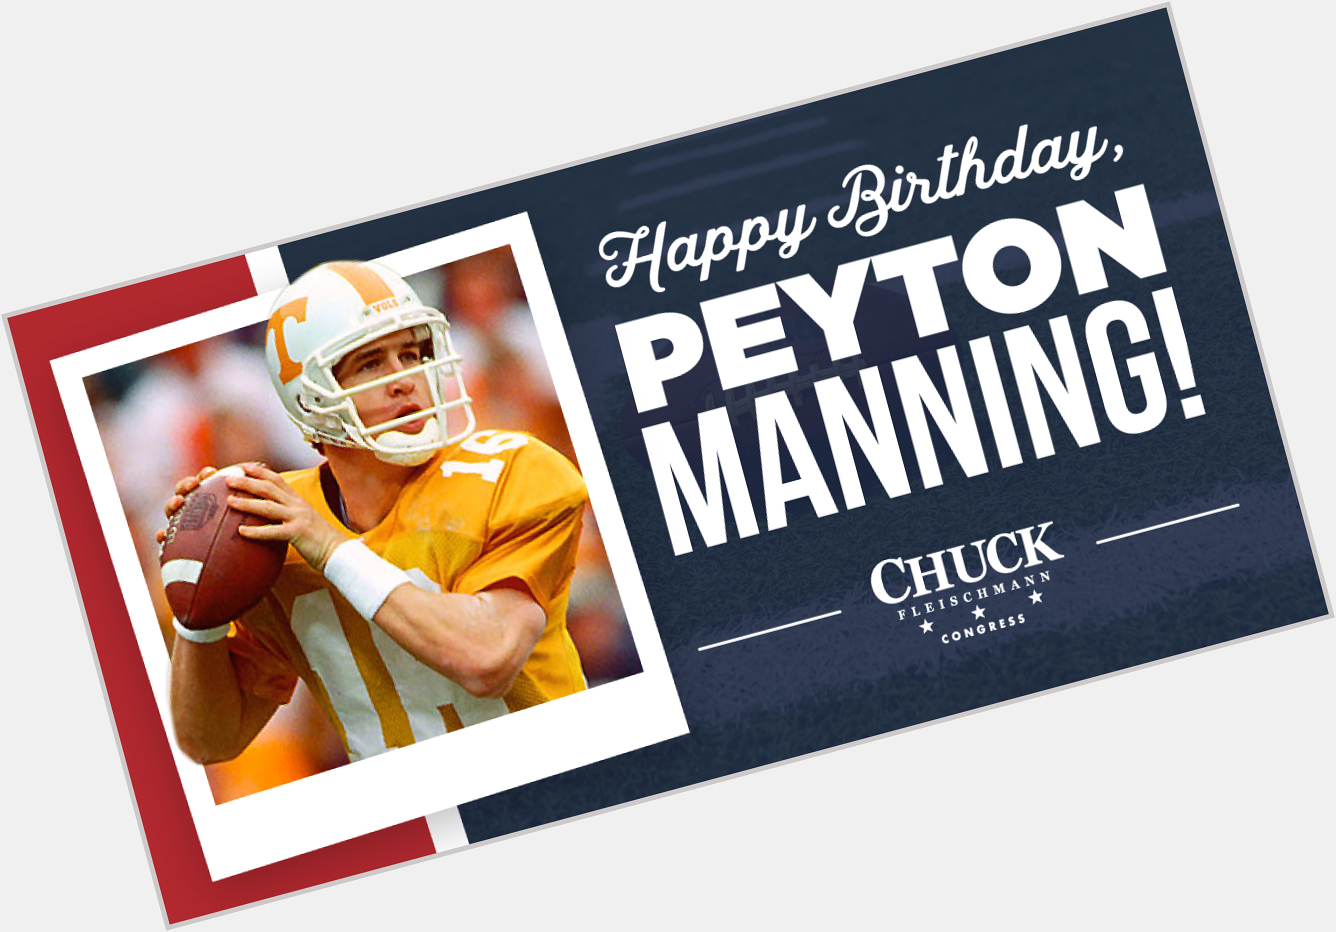 Join me in wishing the great Peyton Manning a very happy birthday! 